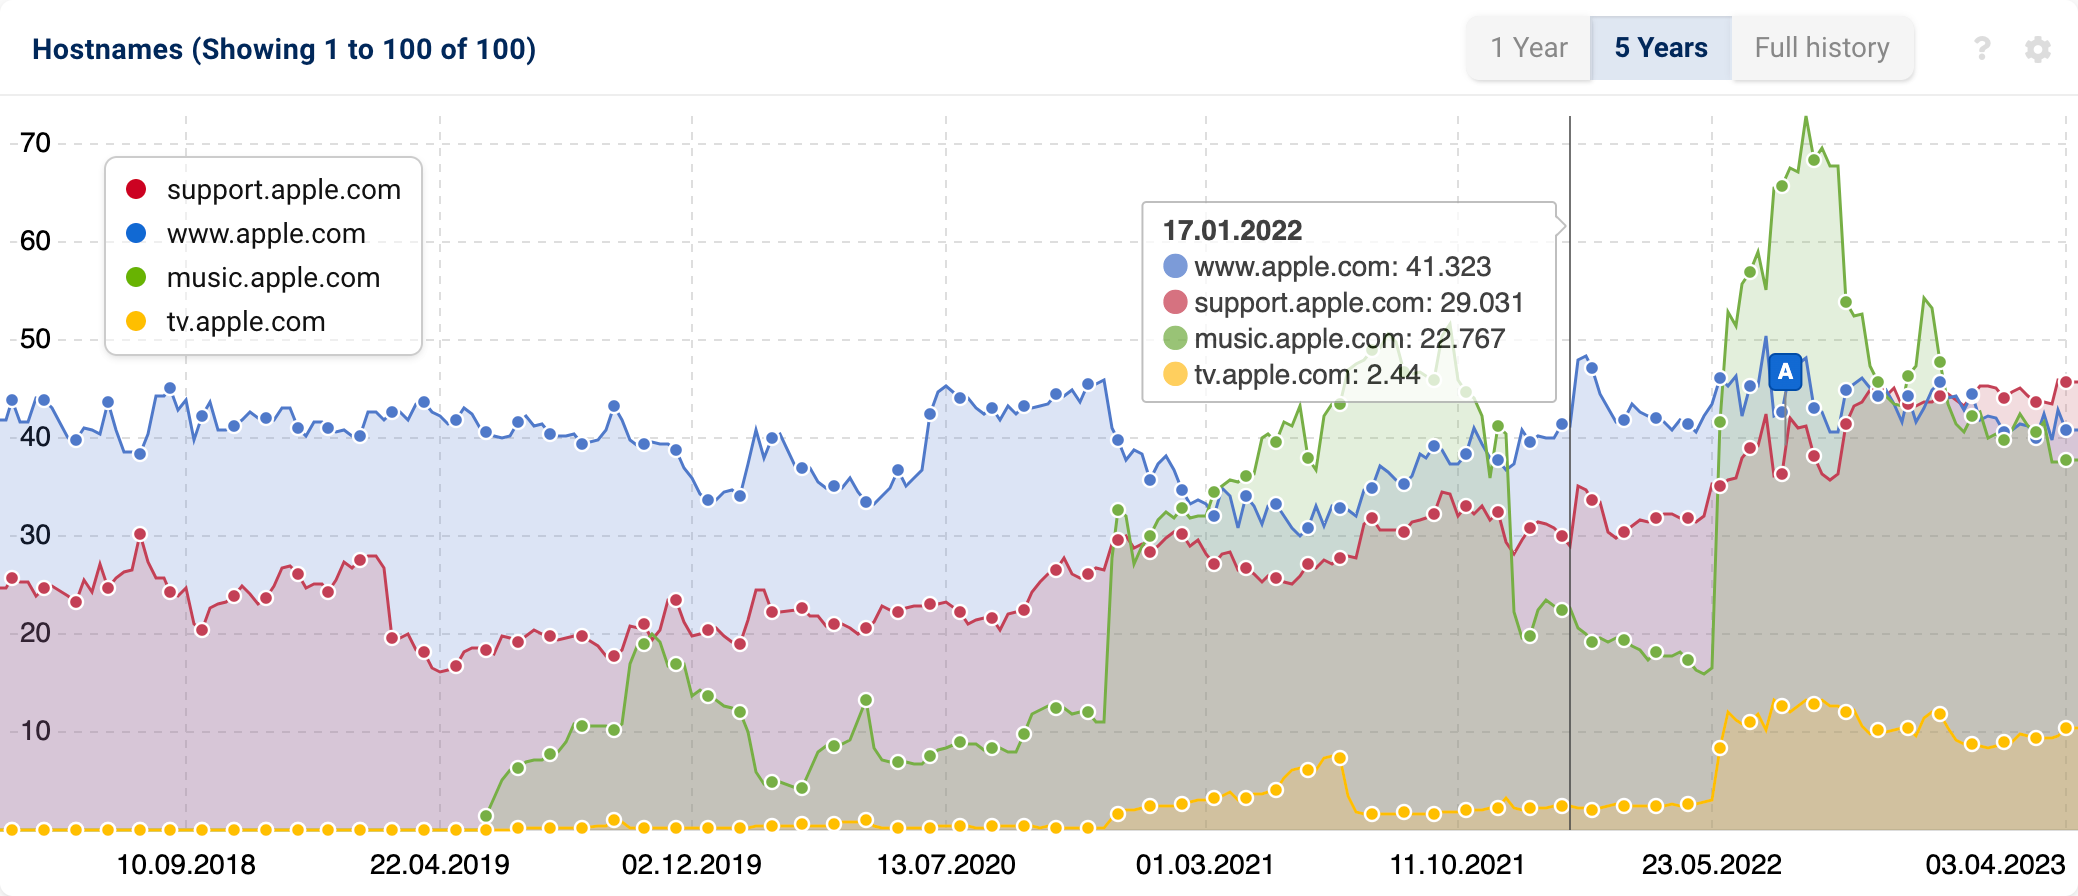 The visibility histories of the four strongest hosts of the domain apple.com. The strongest hosts currently are support. and www., followed by music. and tv.